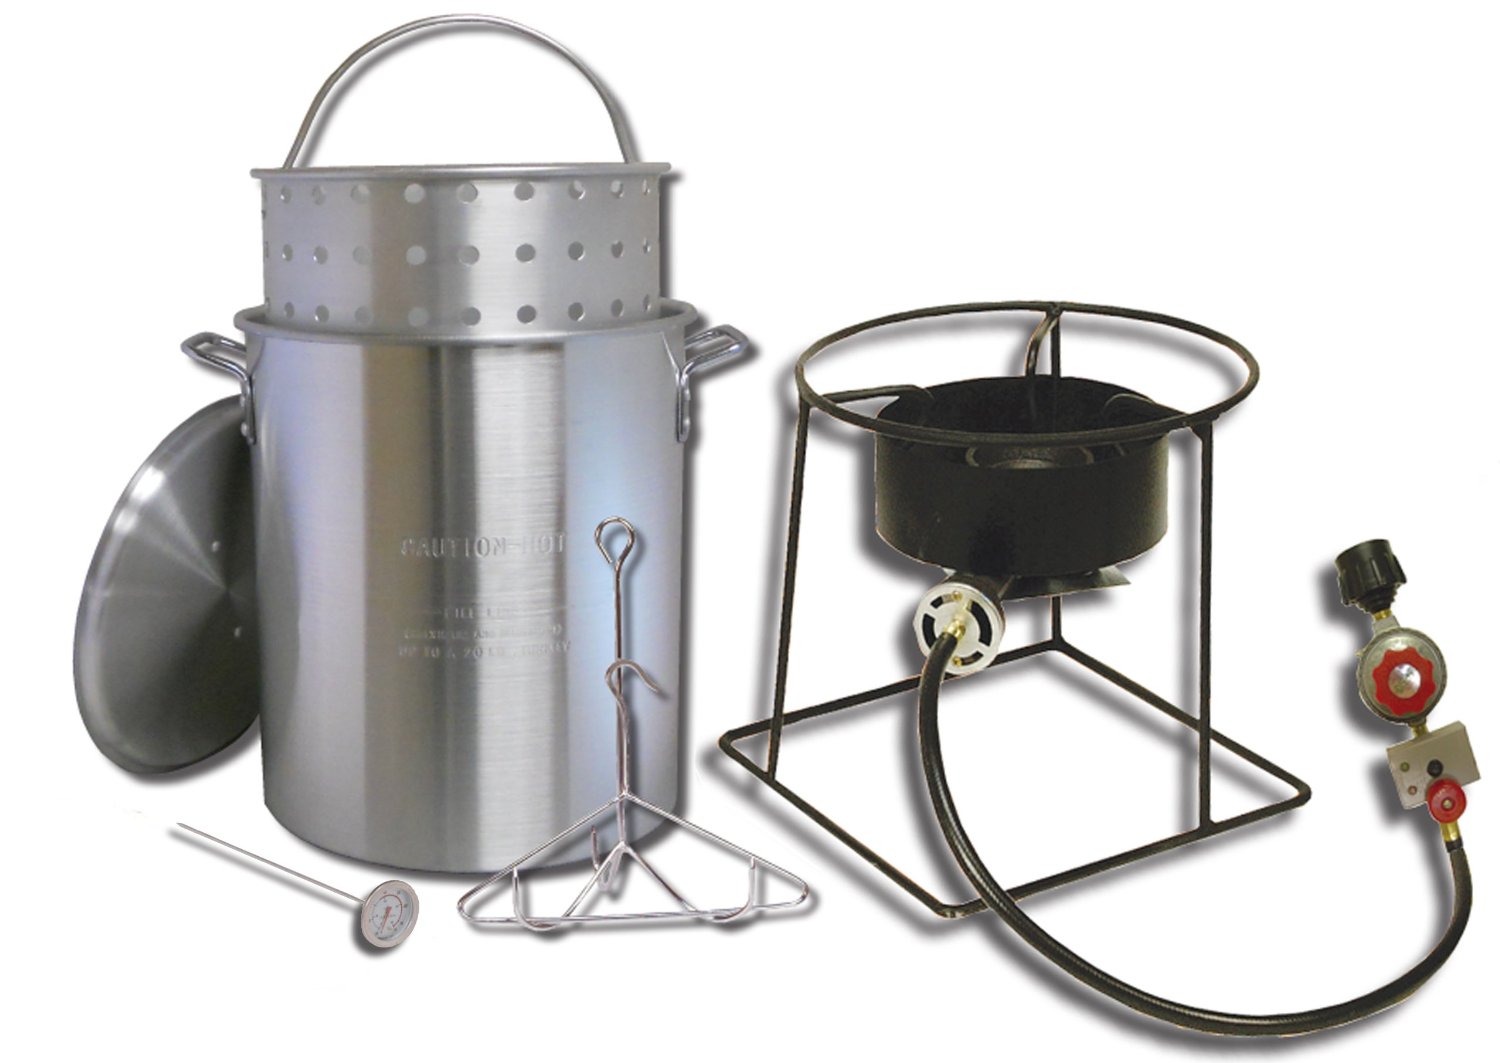 King Kooker 1266B 12-Inch Propane Outdoor Cooker with 29-Quart Aluminum Turkey Pot with Basket